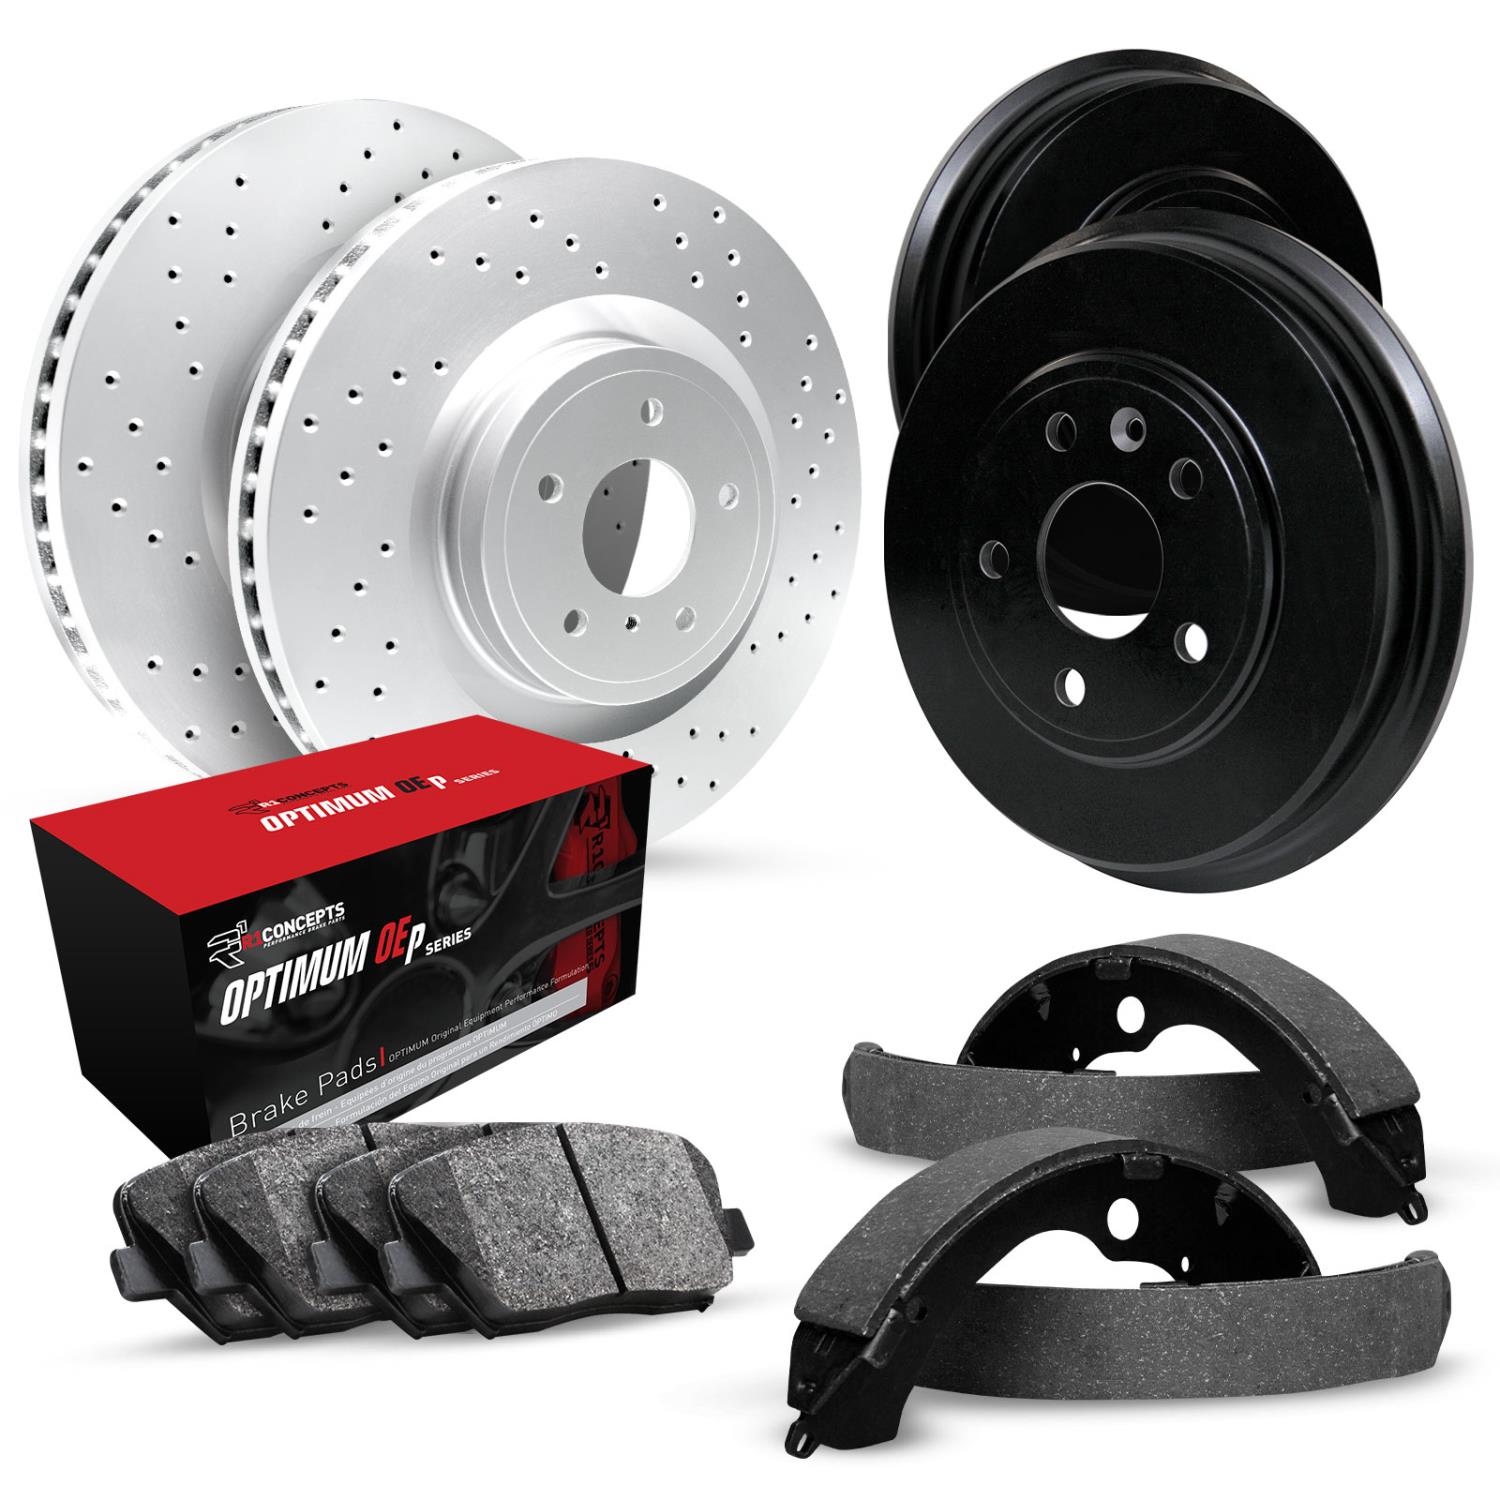 GEO-Carbon Drilled Brake Rotor & Drum Set w/Optimum OE Pads & Shoes, 1988-1991 GM, Position: Front & Rear